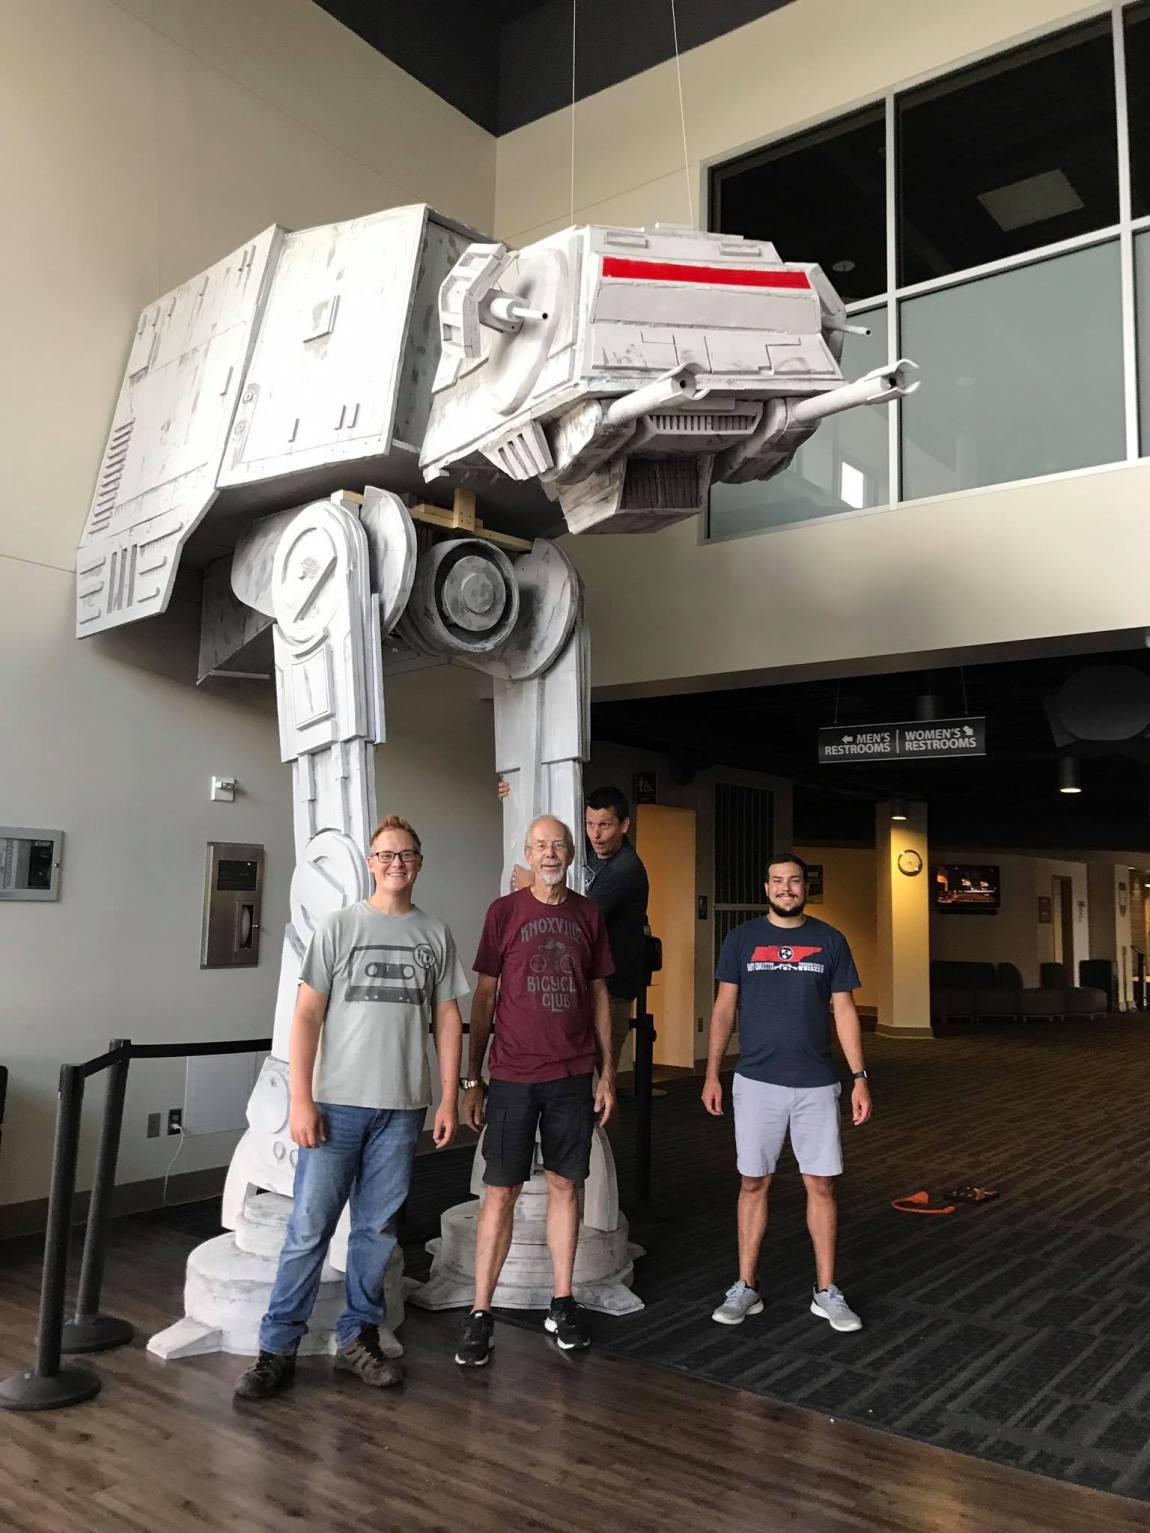 How to Build a Large Scale Star Wars AT-AT Walker From Foam Insulation Boards